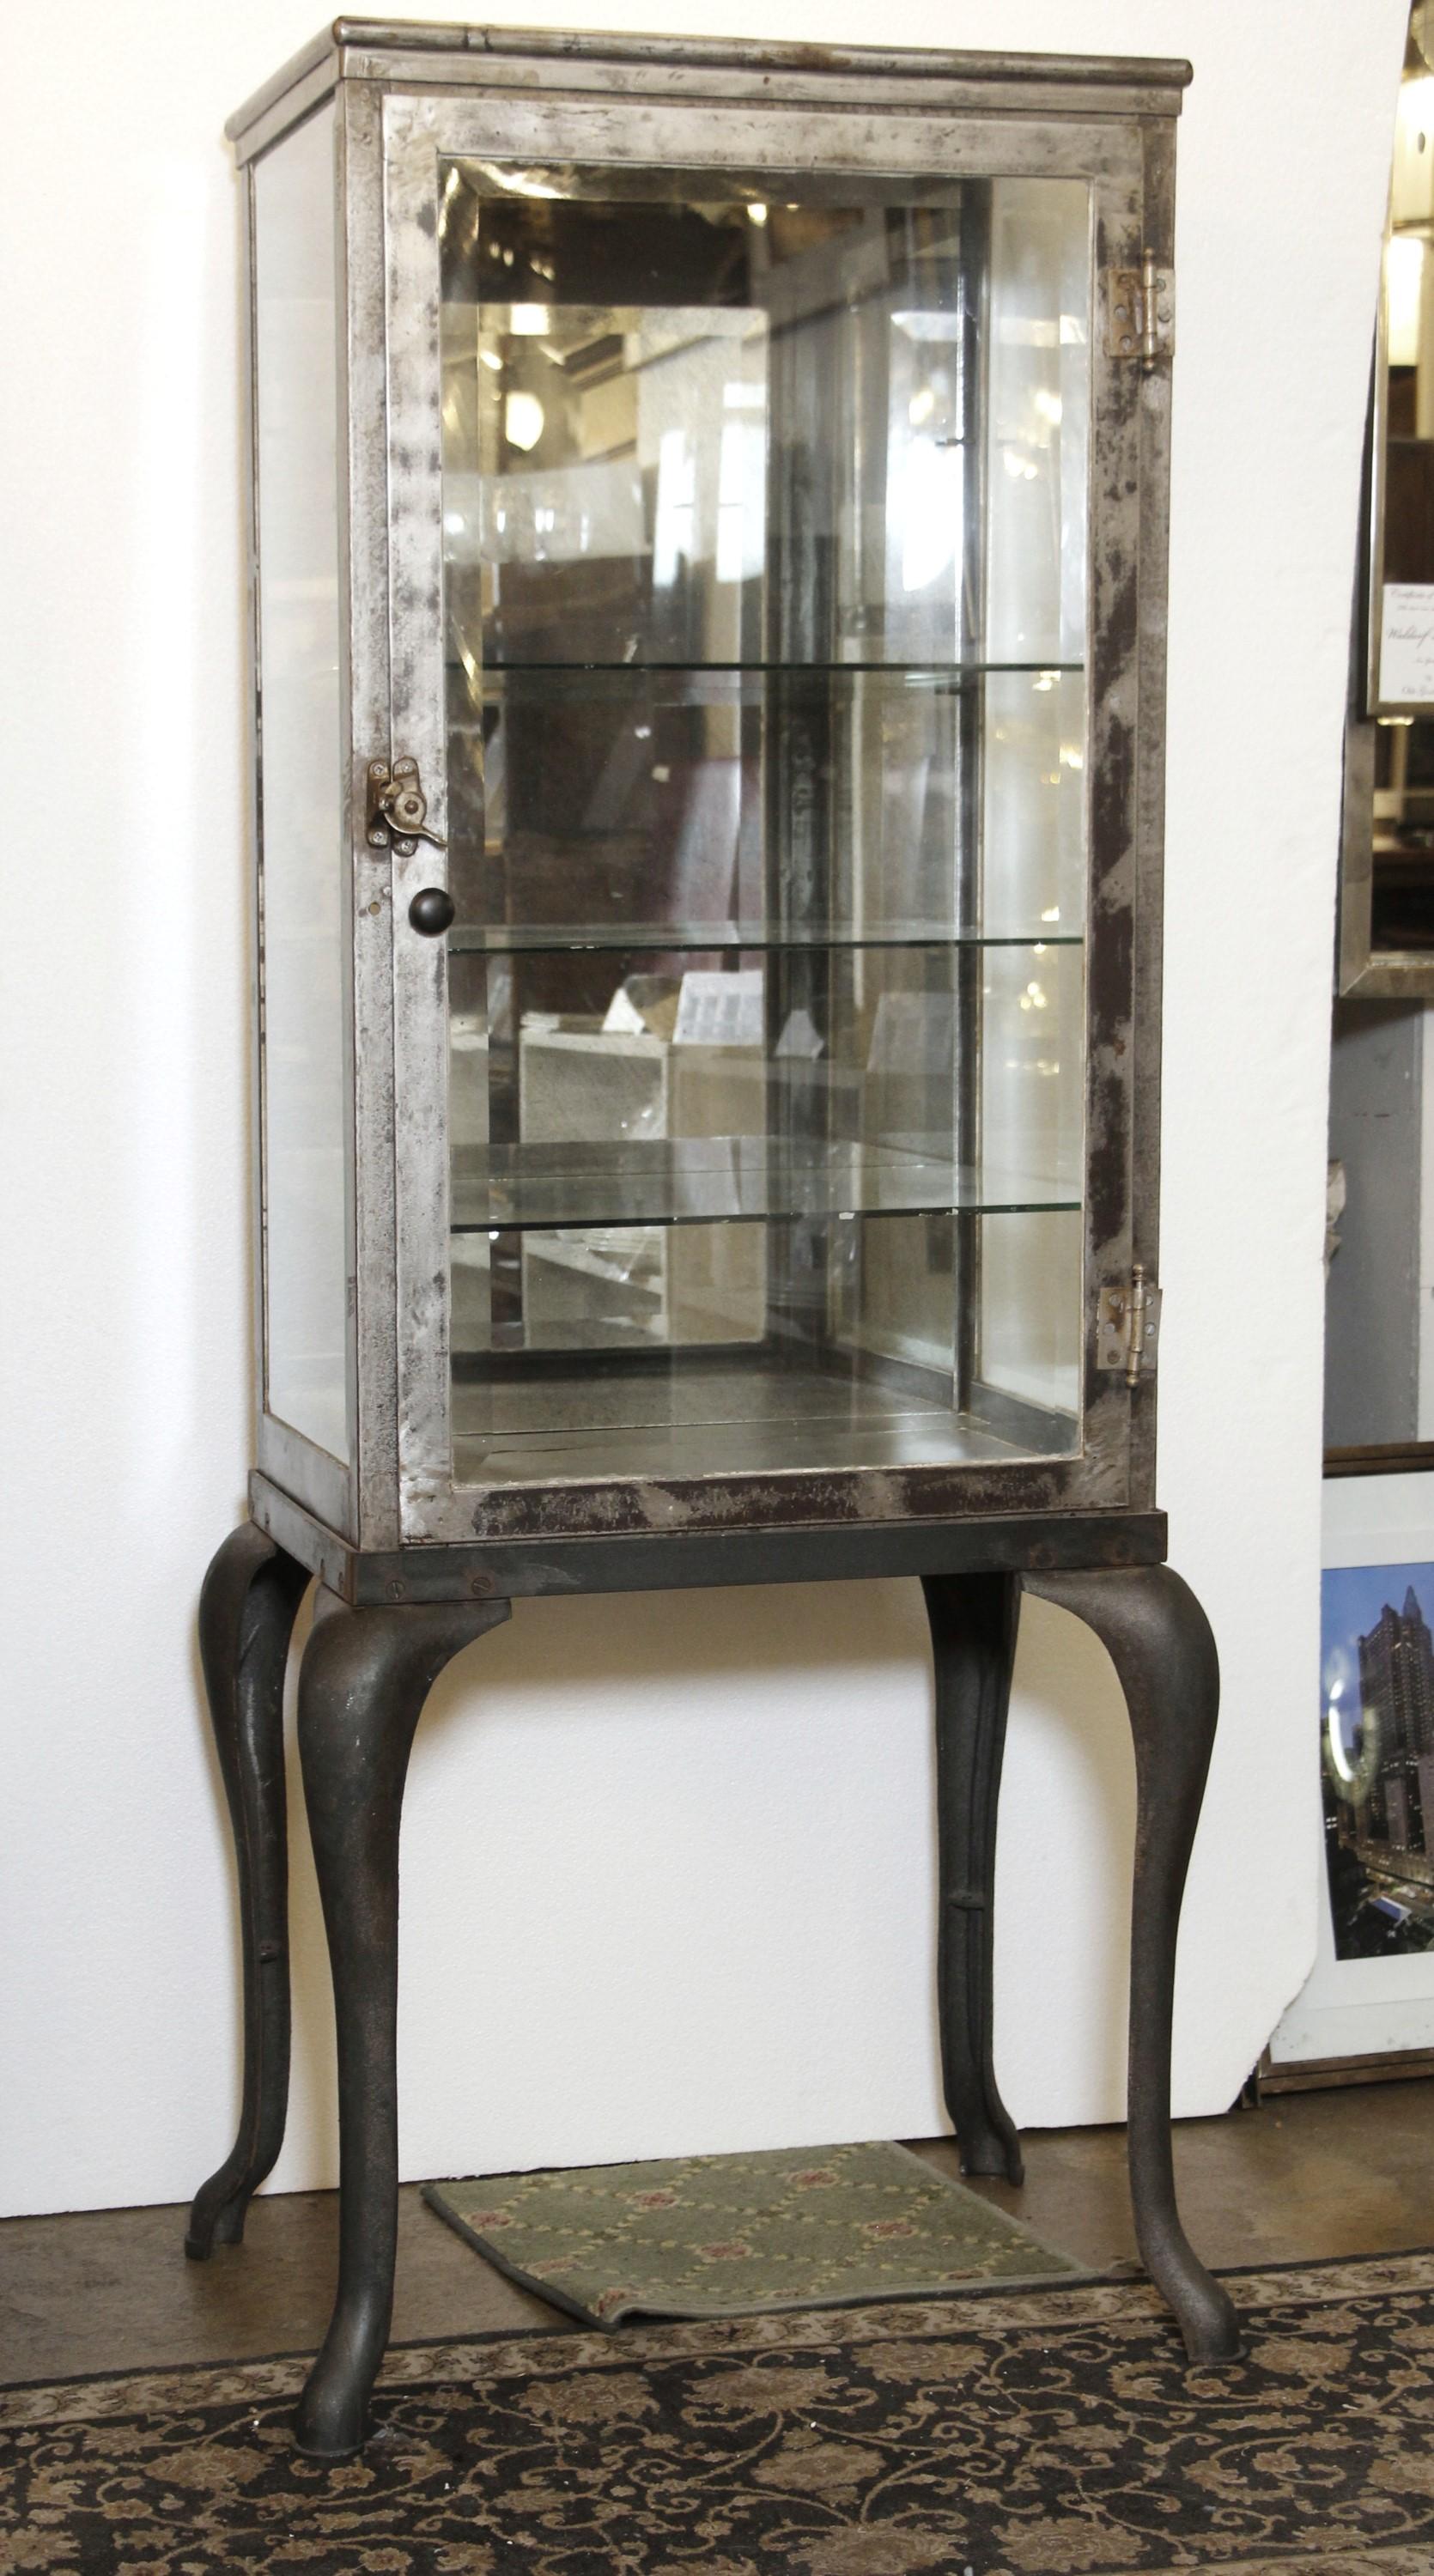 Late 1800s dental or medical cabinet featuring cast iron cabriole legs. Top cabinet is made out of steel. Interior is set up for four shelves. Now stripped and lacquered with a new mirror installed in the back. Please note, this item is located in